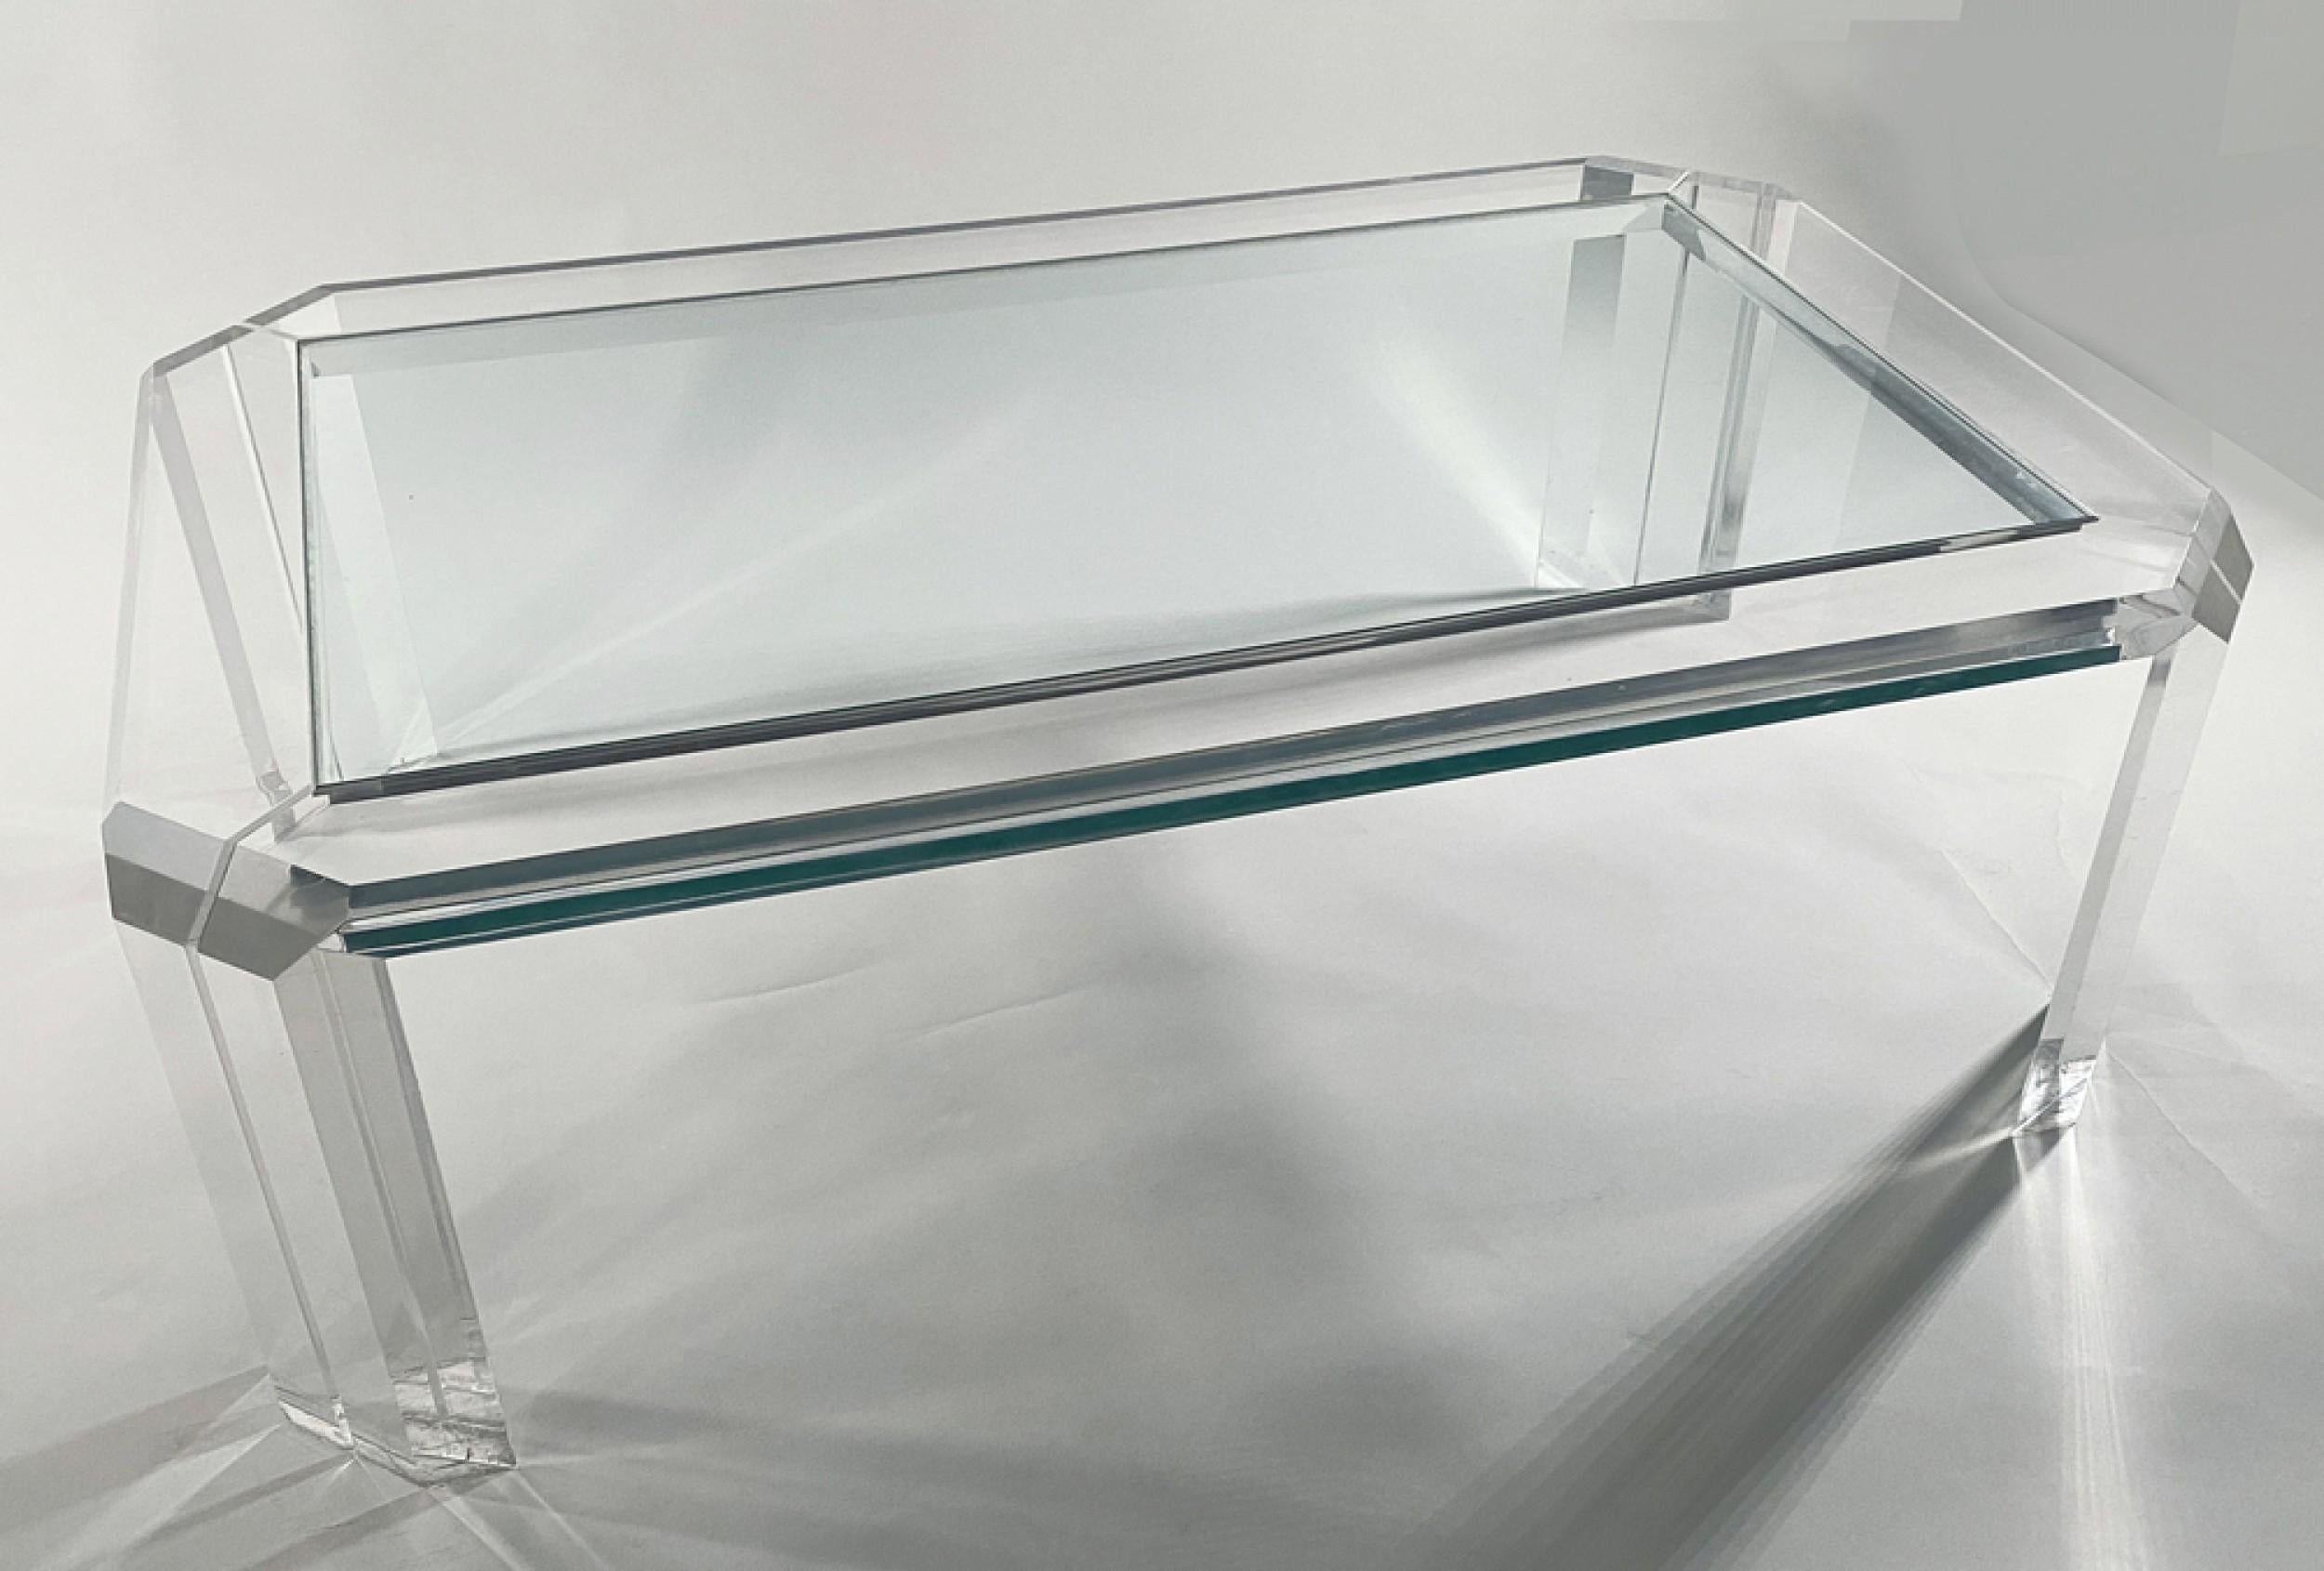 Midcentury American Modern rectangular lucite frame cocktail / coffee table with an inset clear glass top and canted corners, resting on four tapered lucite legs. (Charles Hollis Jones).